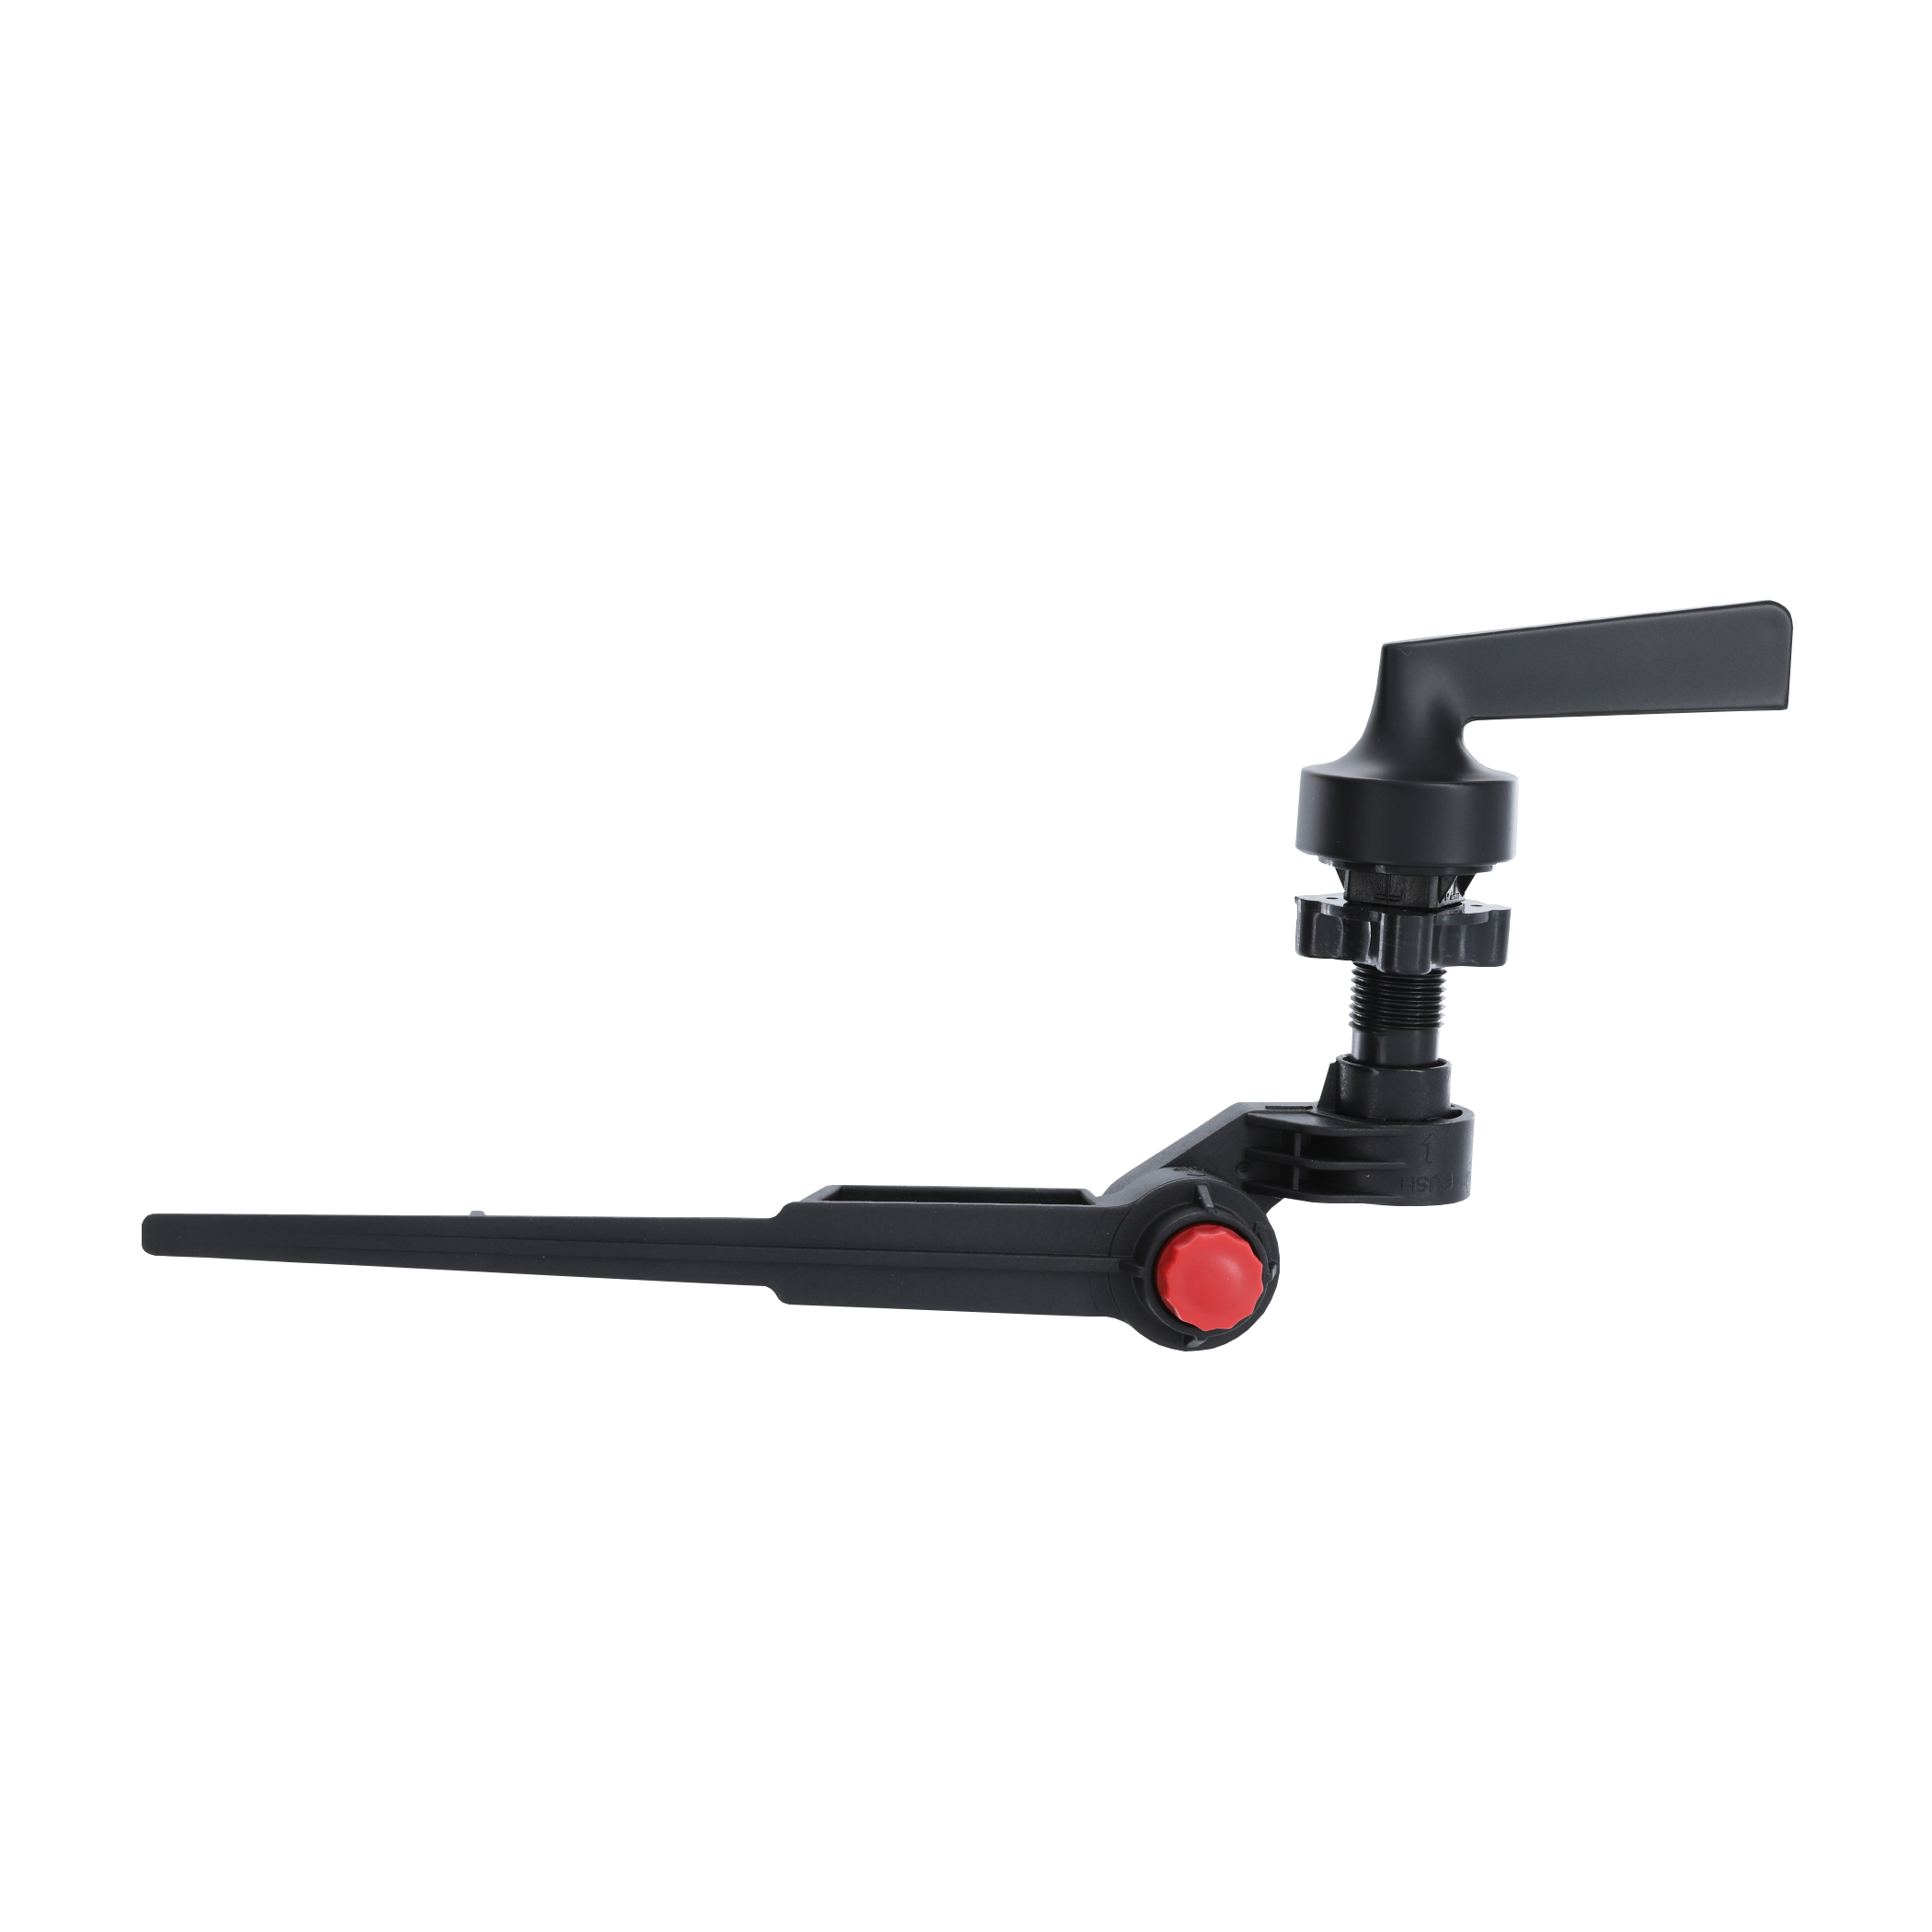 Toilet Tank Lever Replacement Handle in Matte Black